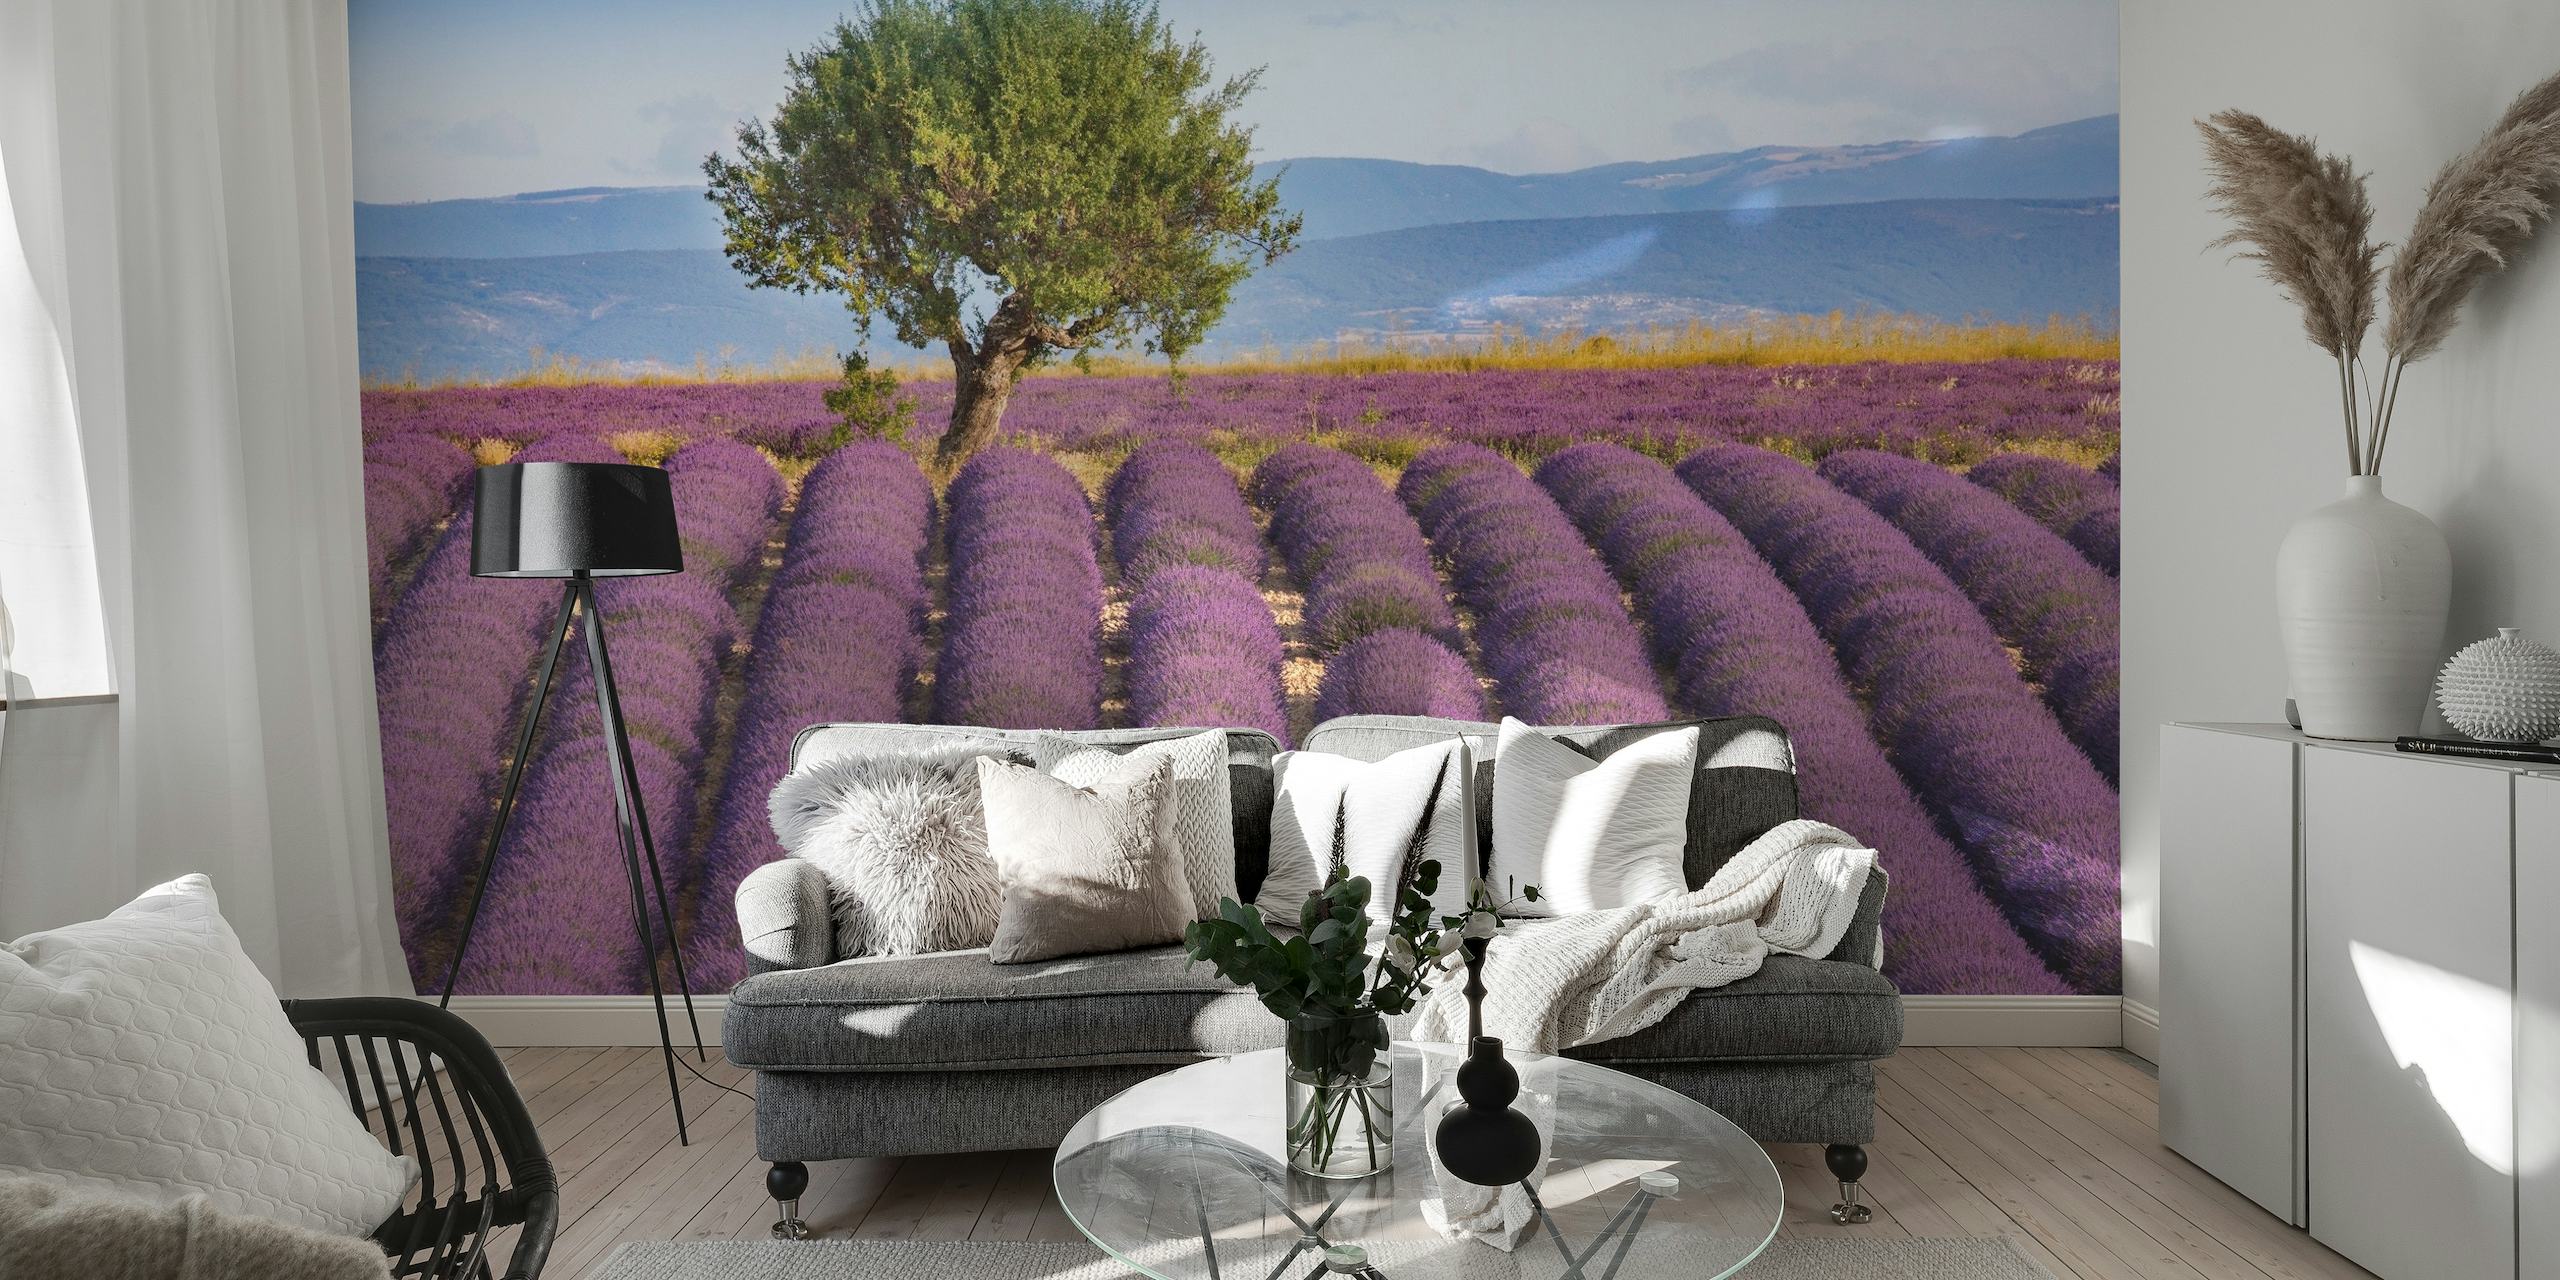 A calm scene of Lavender Haute Provence with rich purple fields under a clear sky